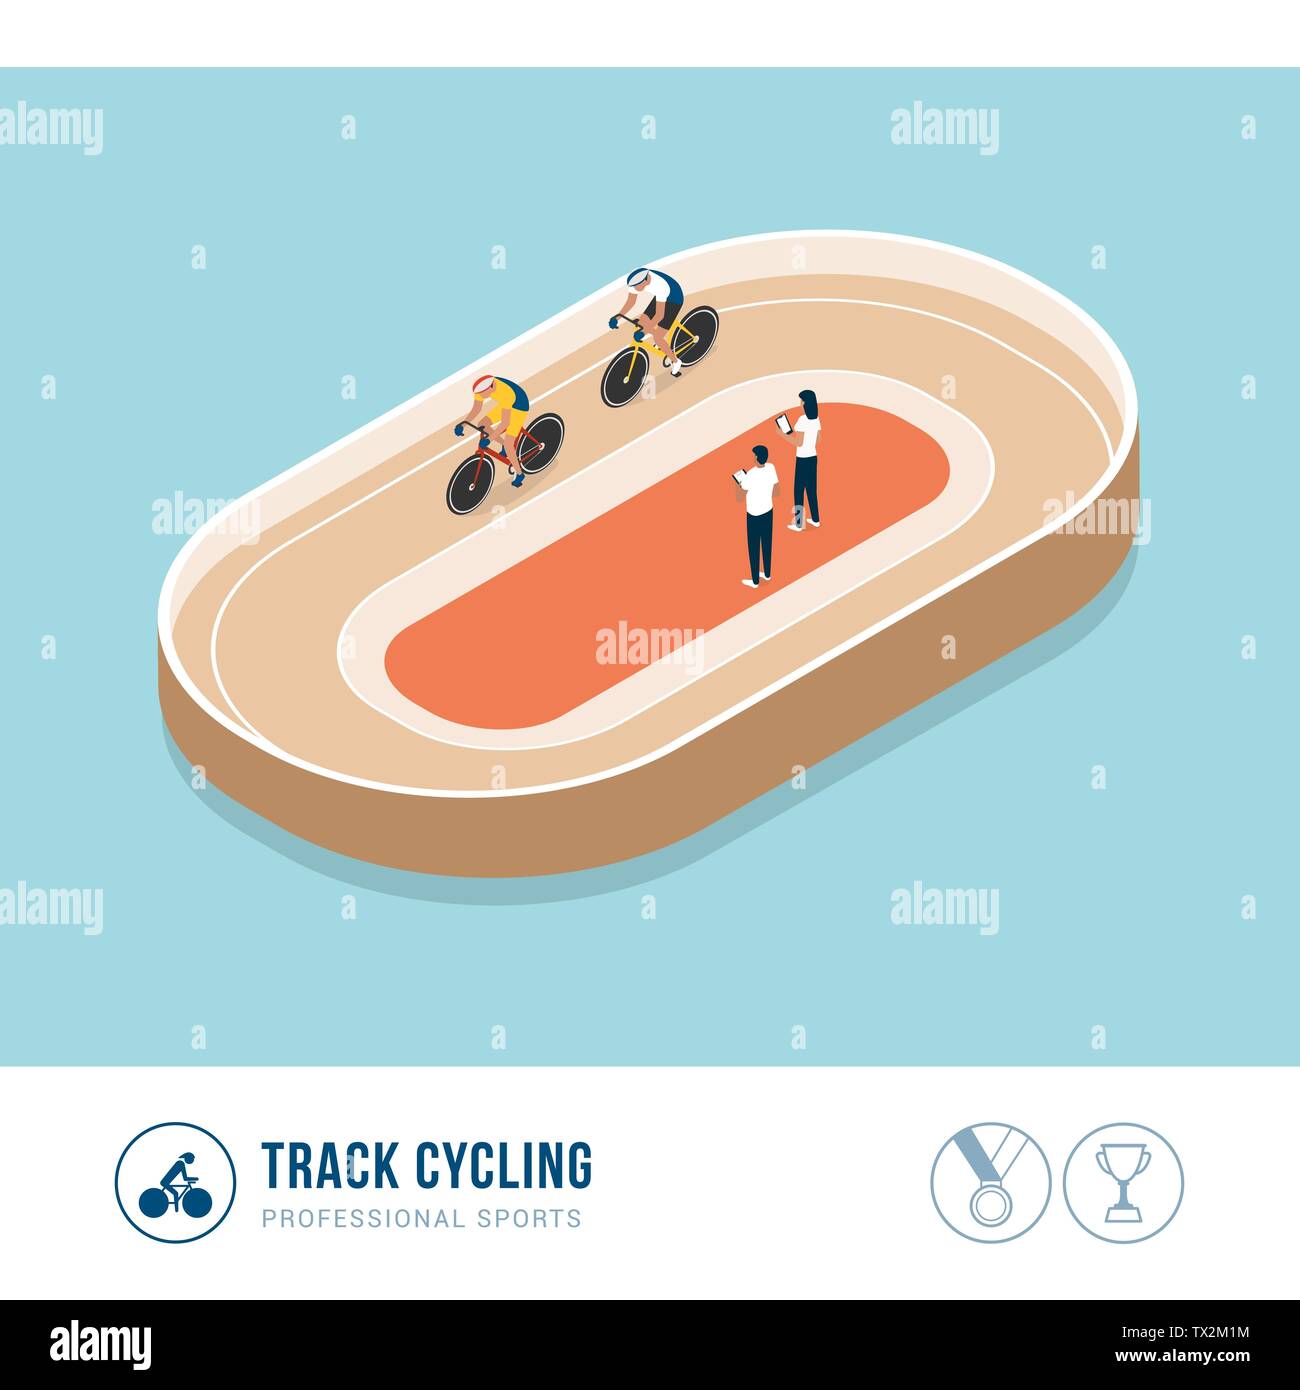 Professional sports competition: track cycling, cyclists riding a bicycle during a race Stock Vector